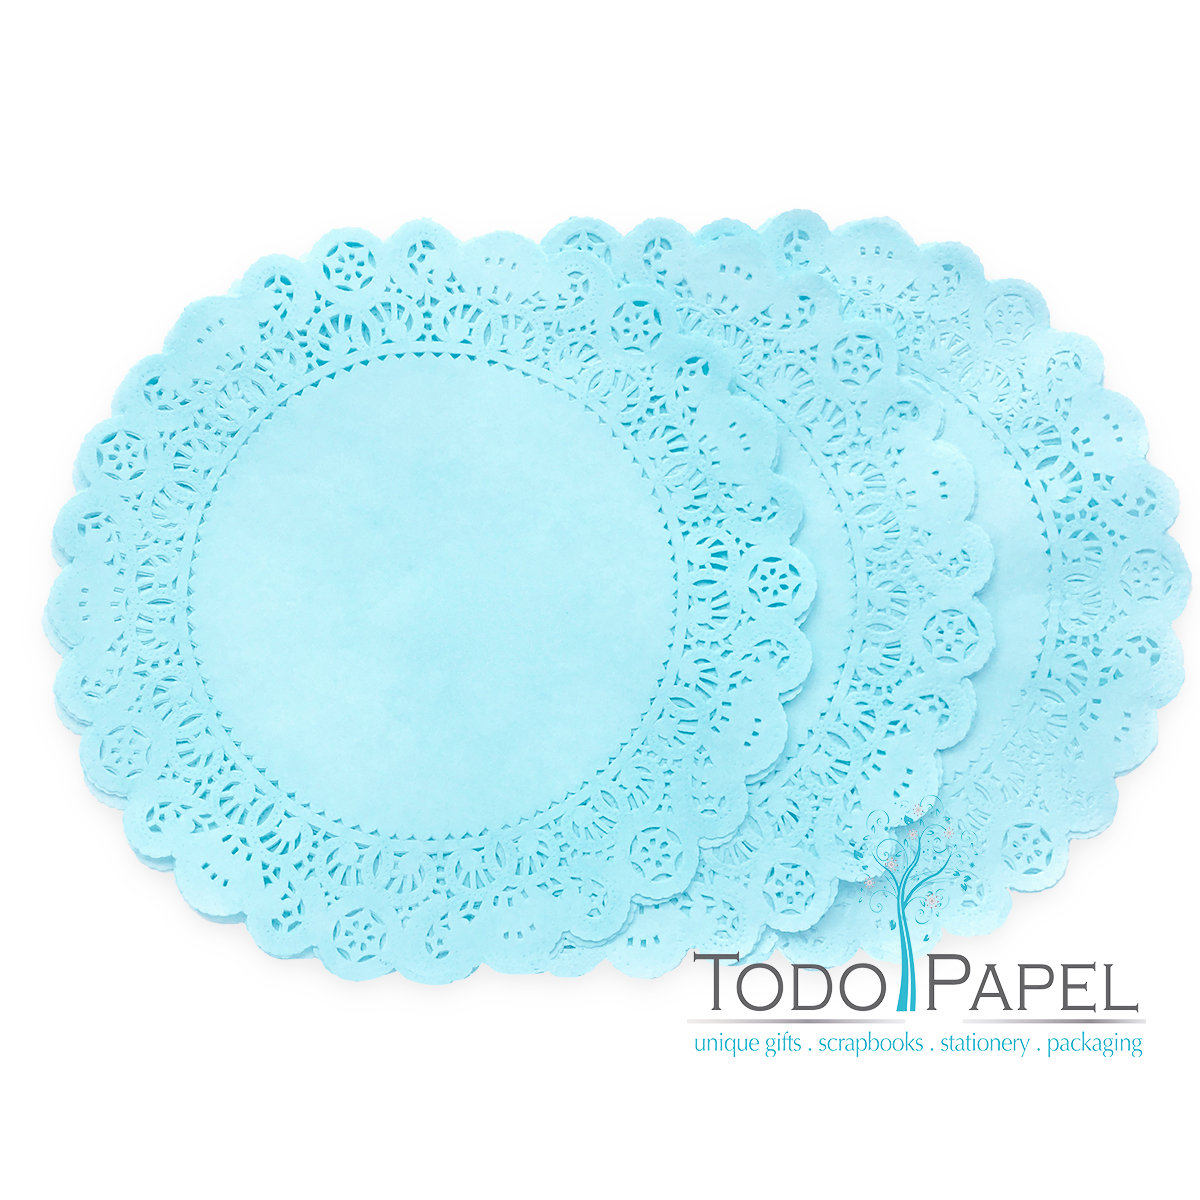 50 Pack 12 Inch Normandy Style Sky Blue Paper Lace Doilies - Great As Table Décor Plate Chargers, Placemats, And Centerpieces For Wedding